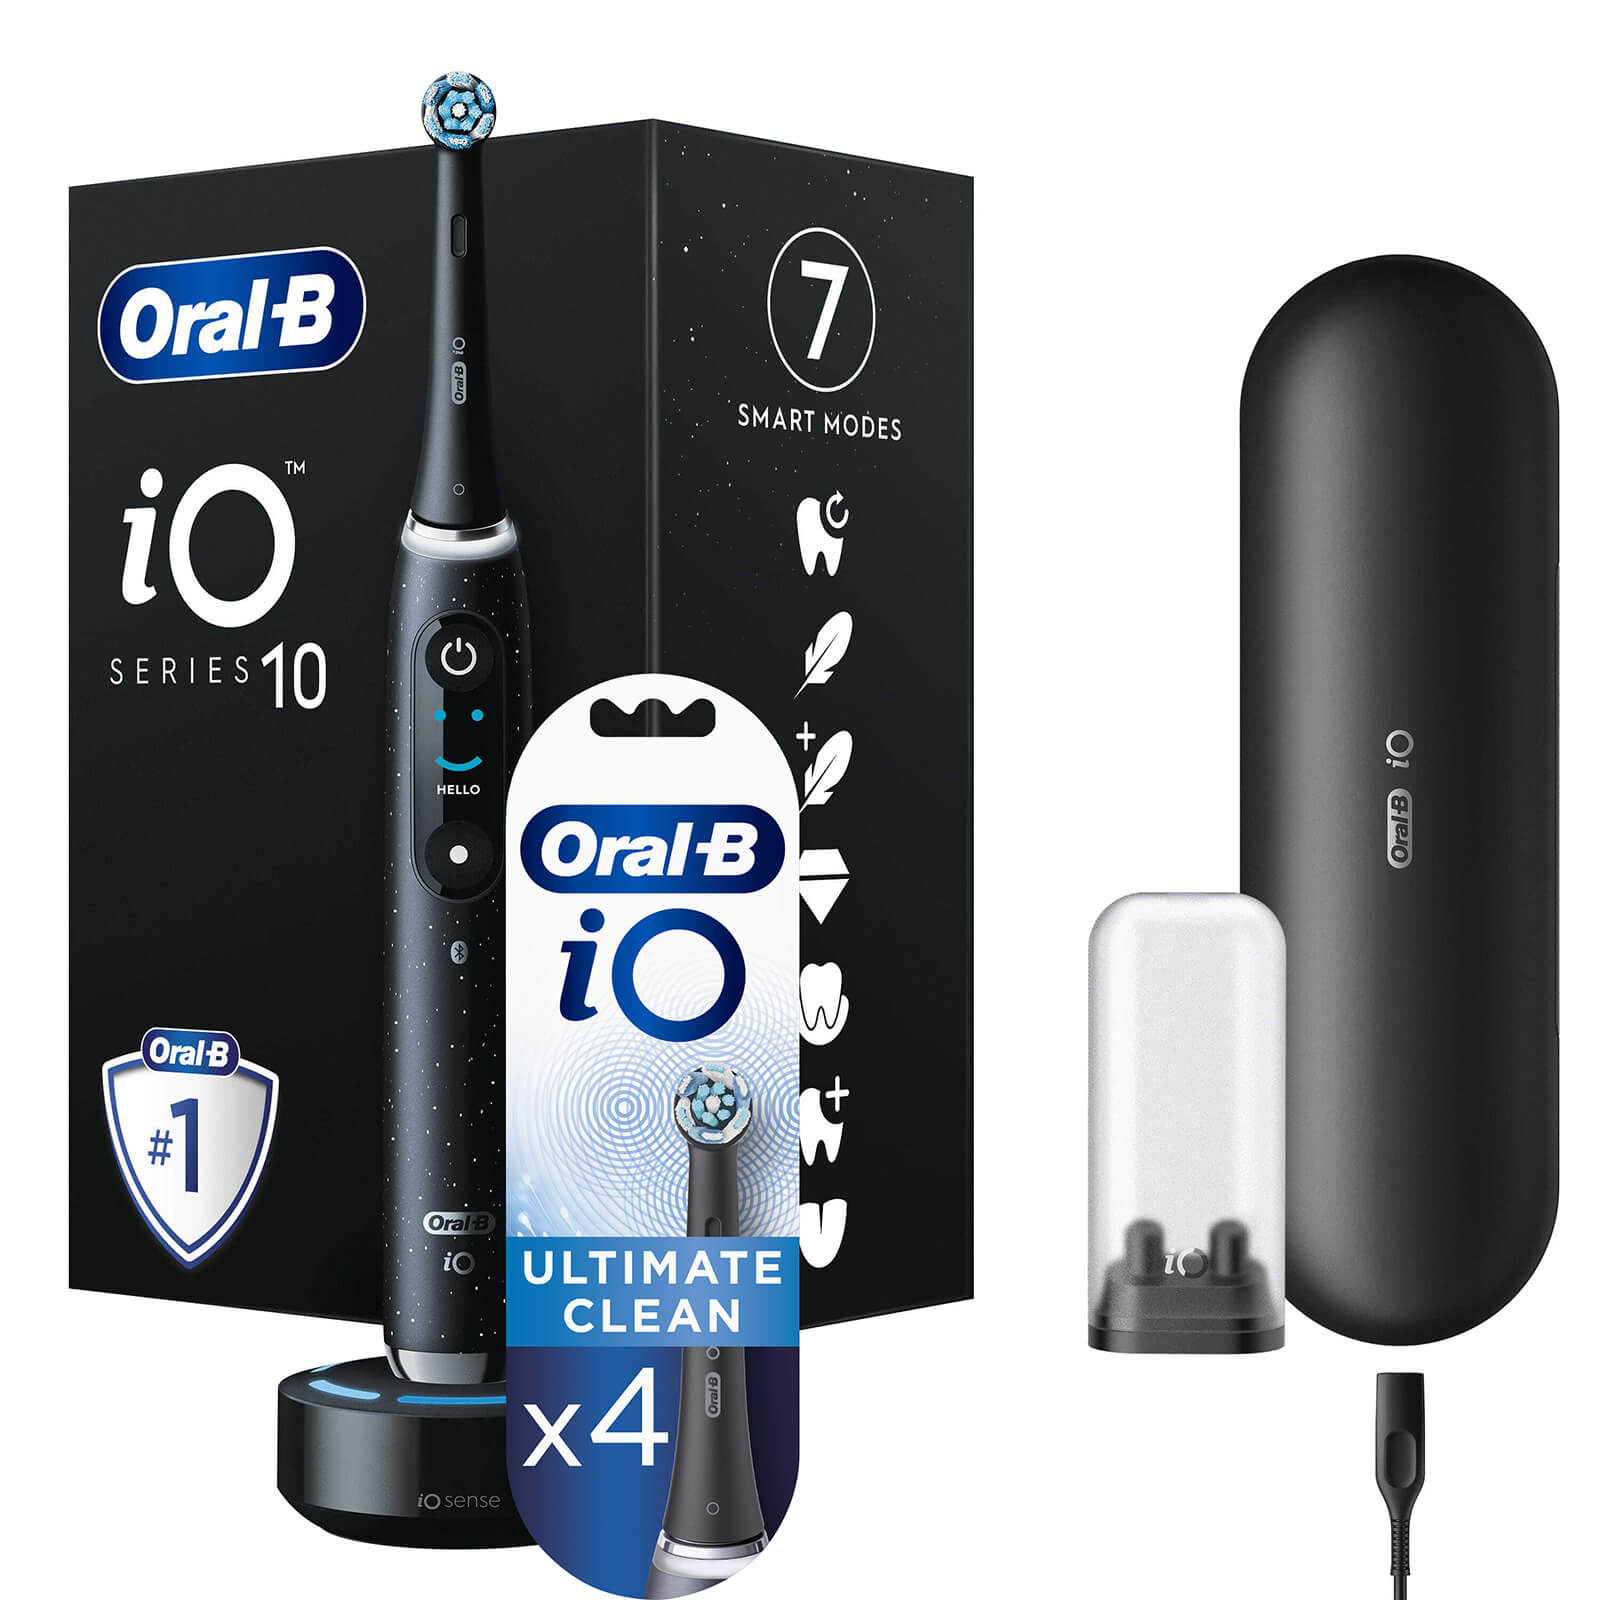 Oral-B iO10 Cosmic Black Electric Toothbrush with Charging Travel Case - Toothbrush + 4 Refills